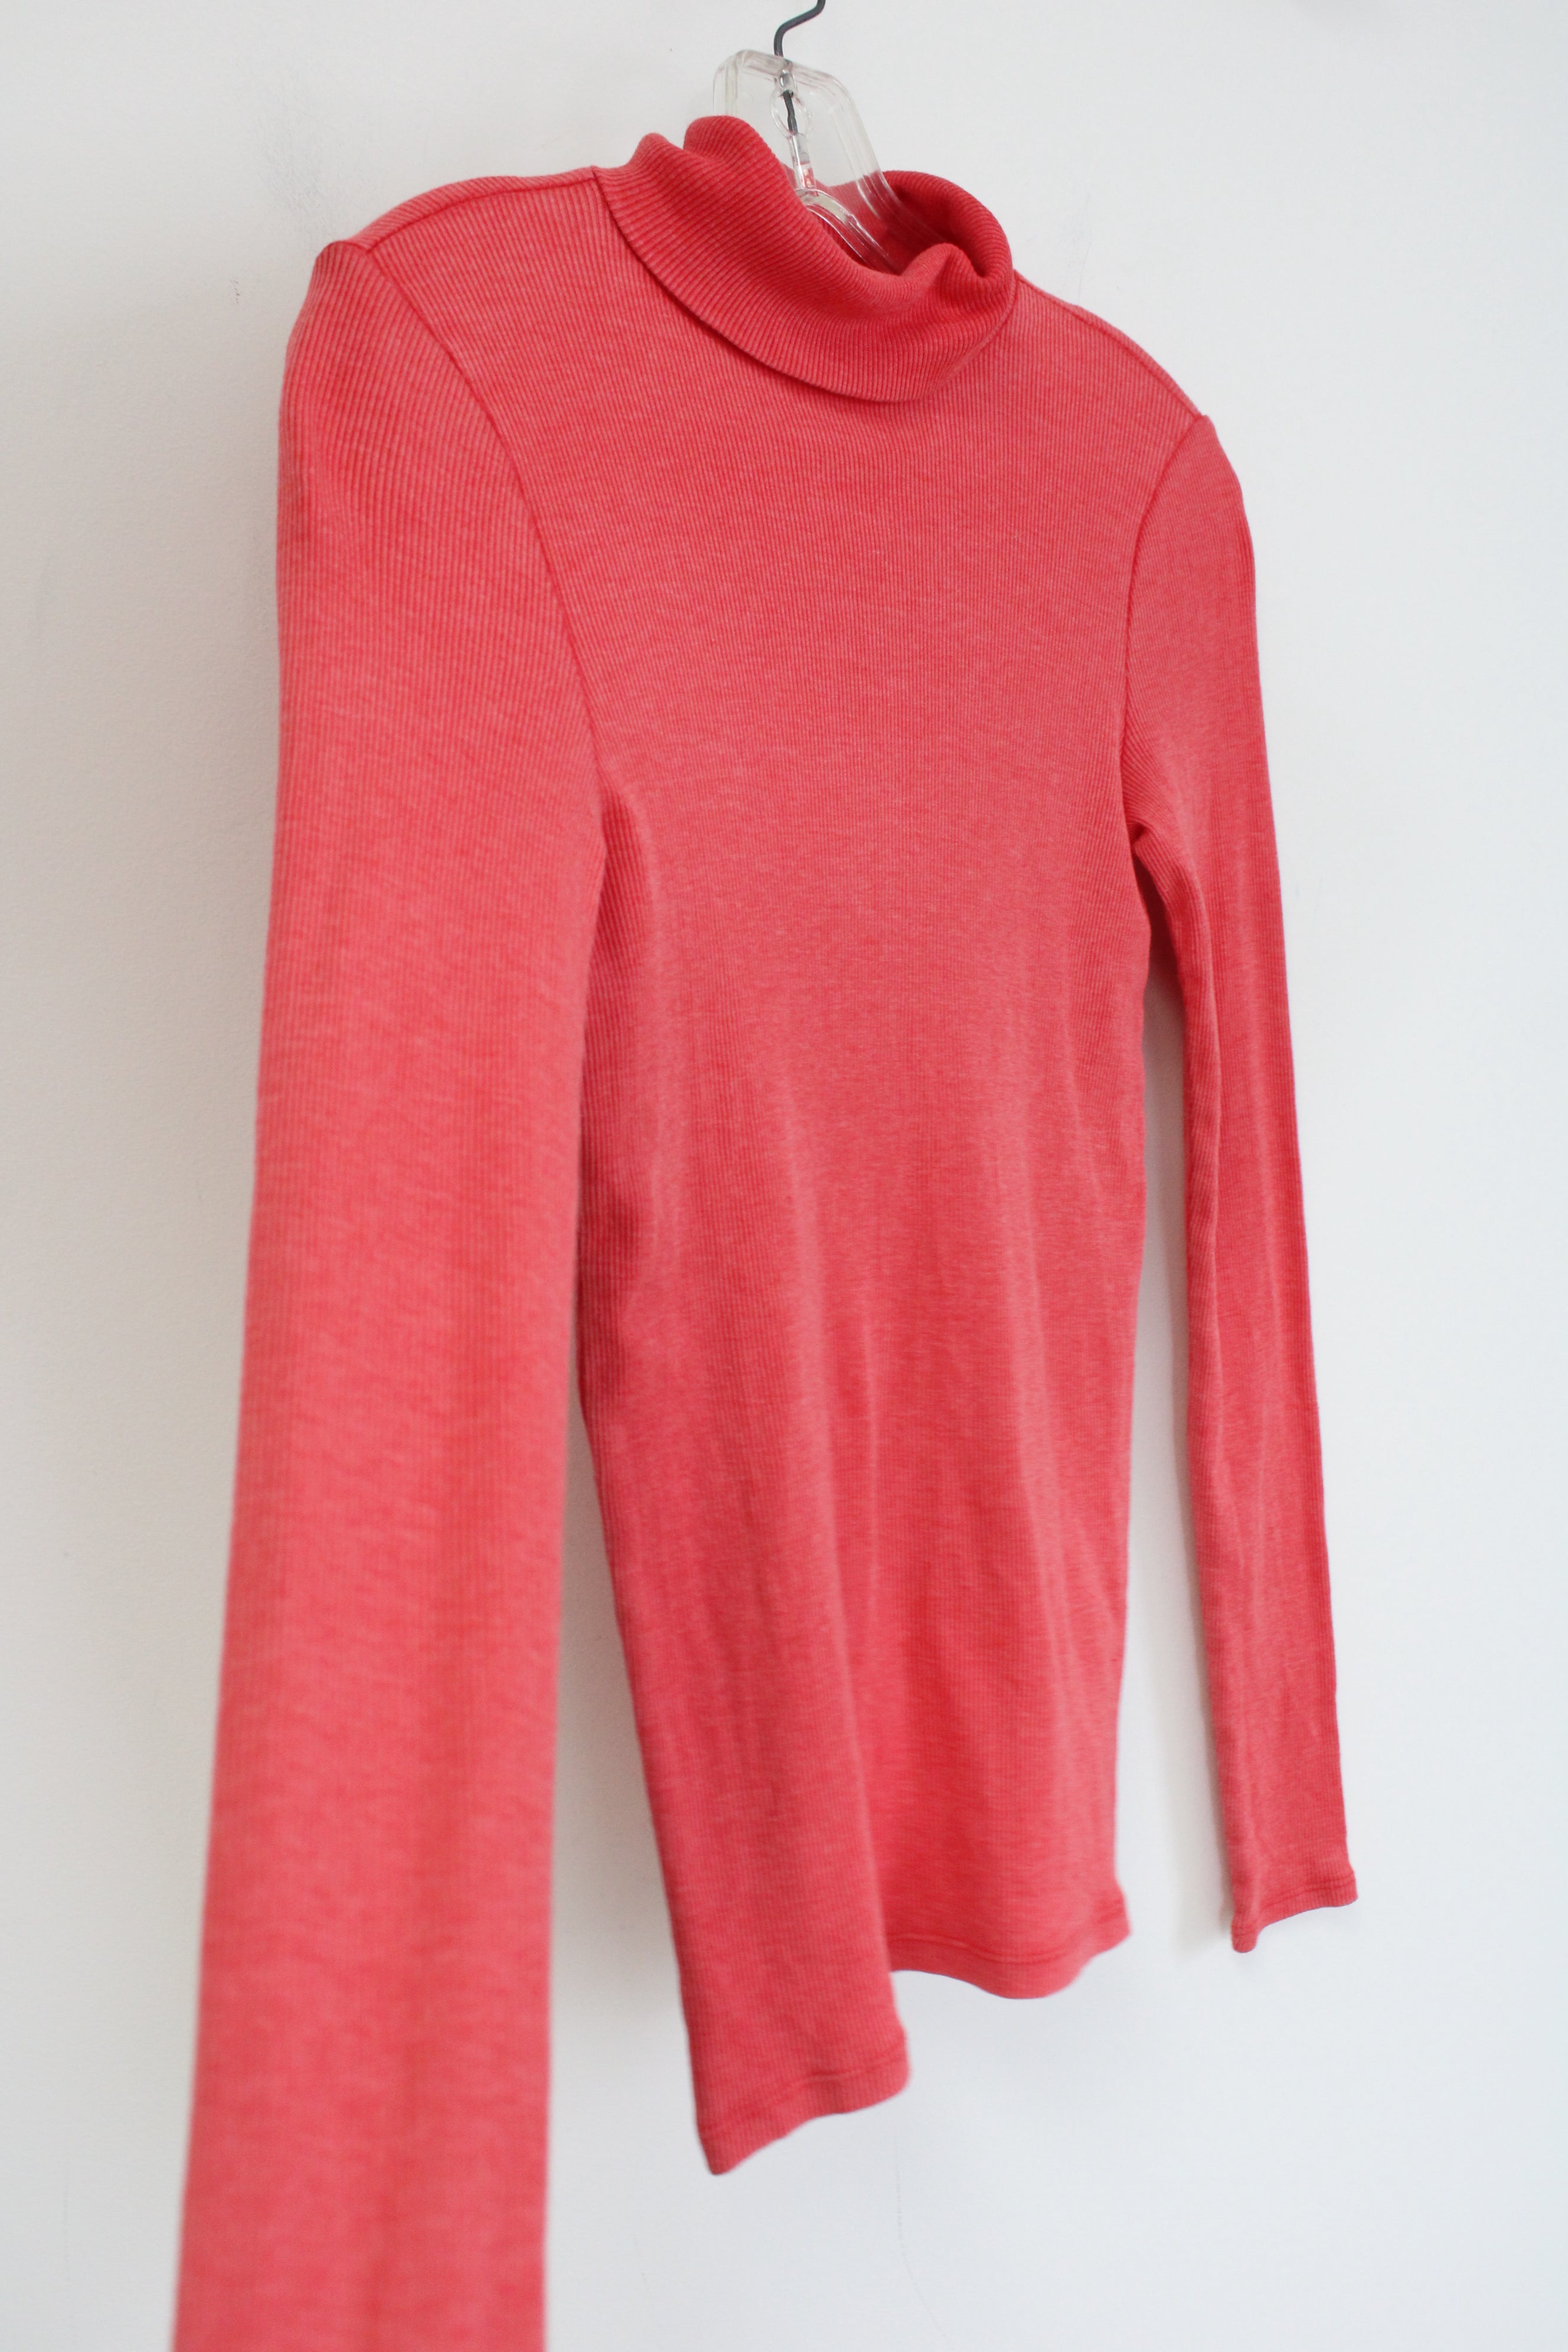 Aerie Real Soft Coral Ribbed Turtleneck Long Sleeved Shirt | XS